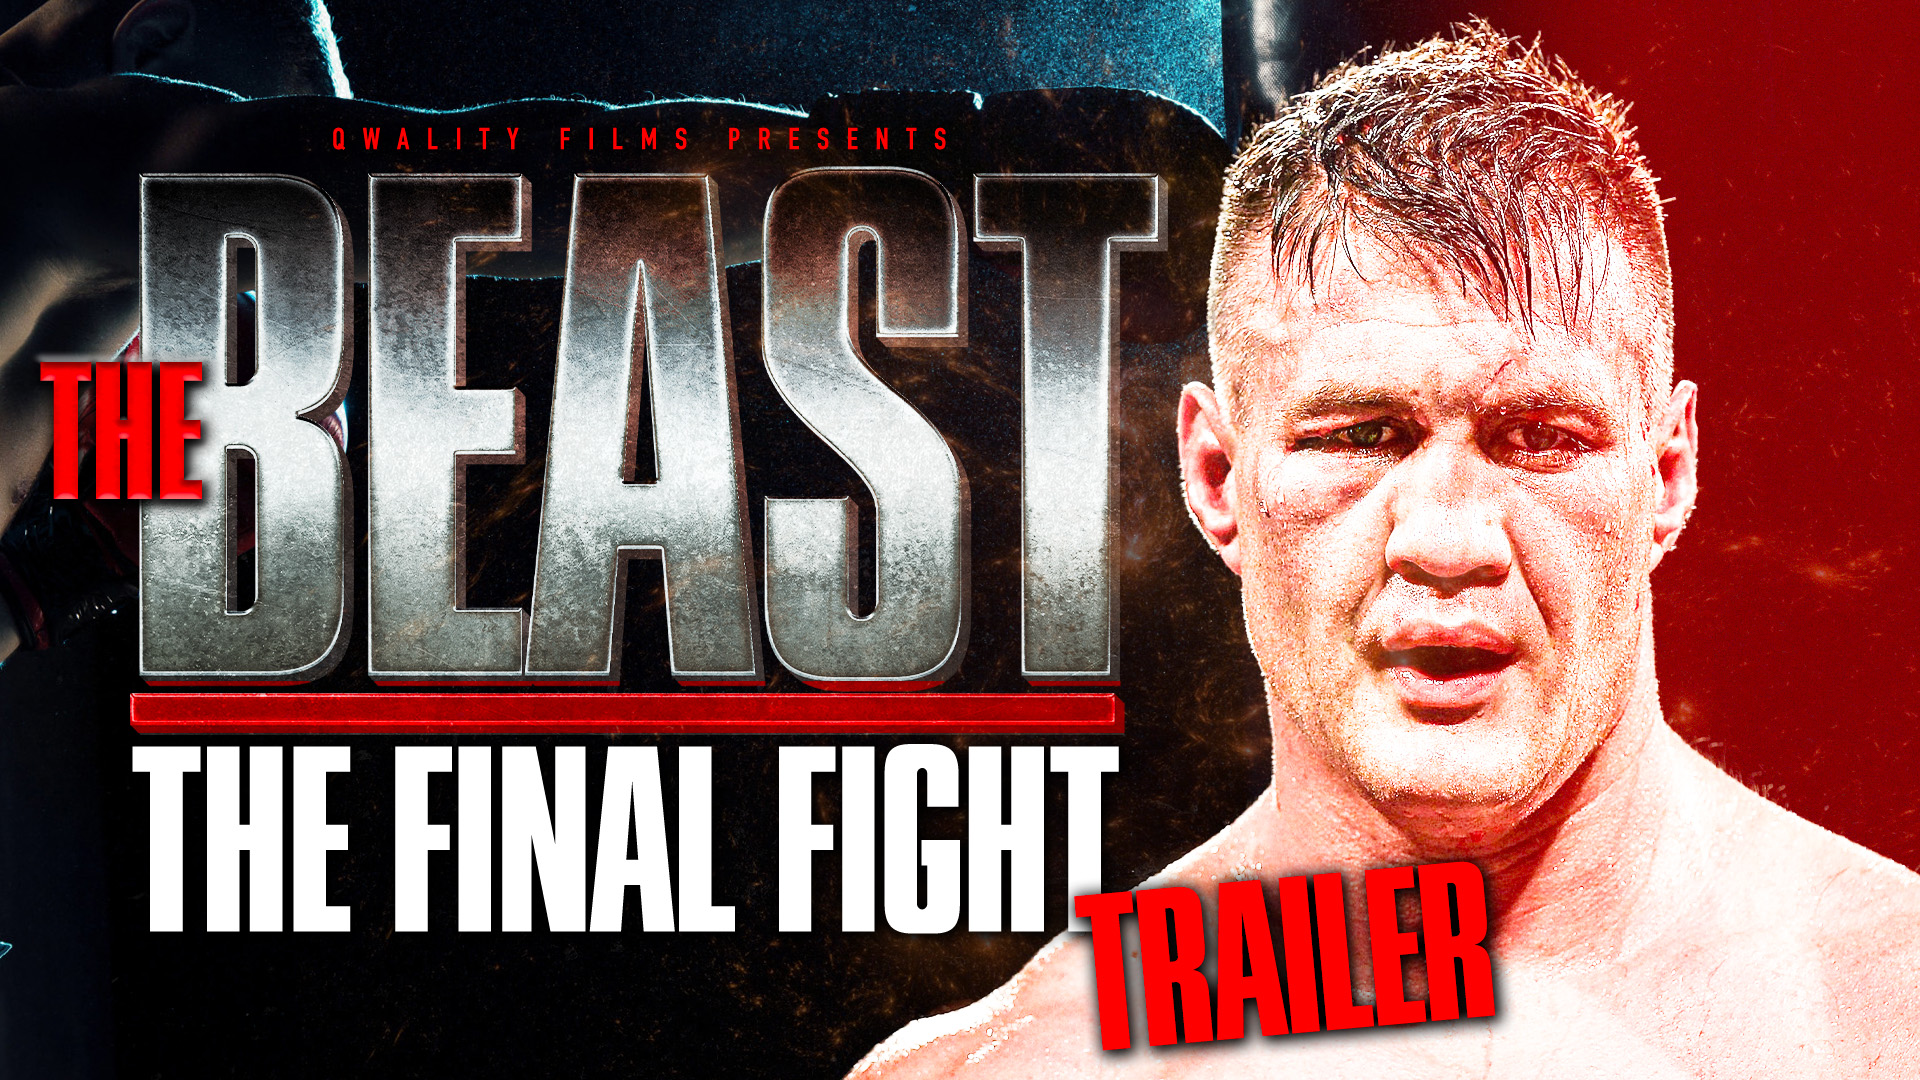 The Beast: The Final Fight Trailer